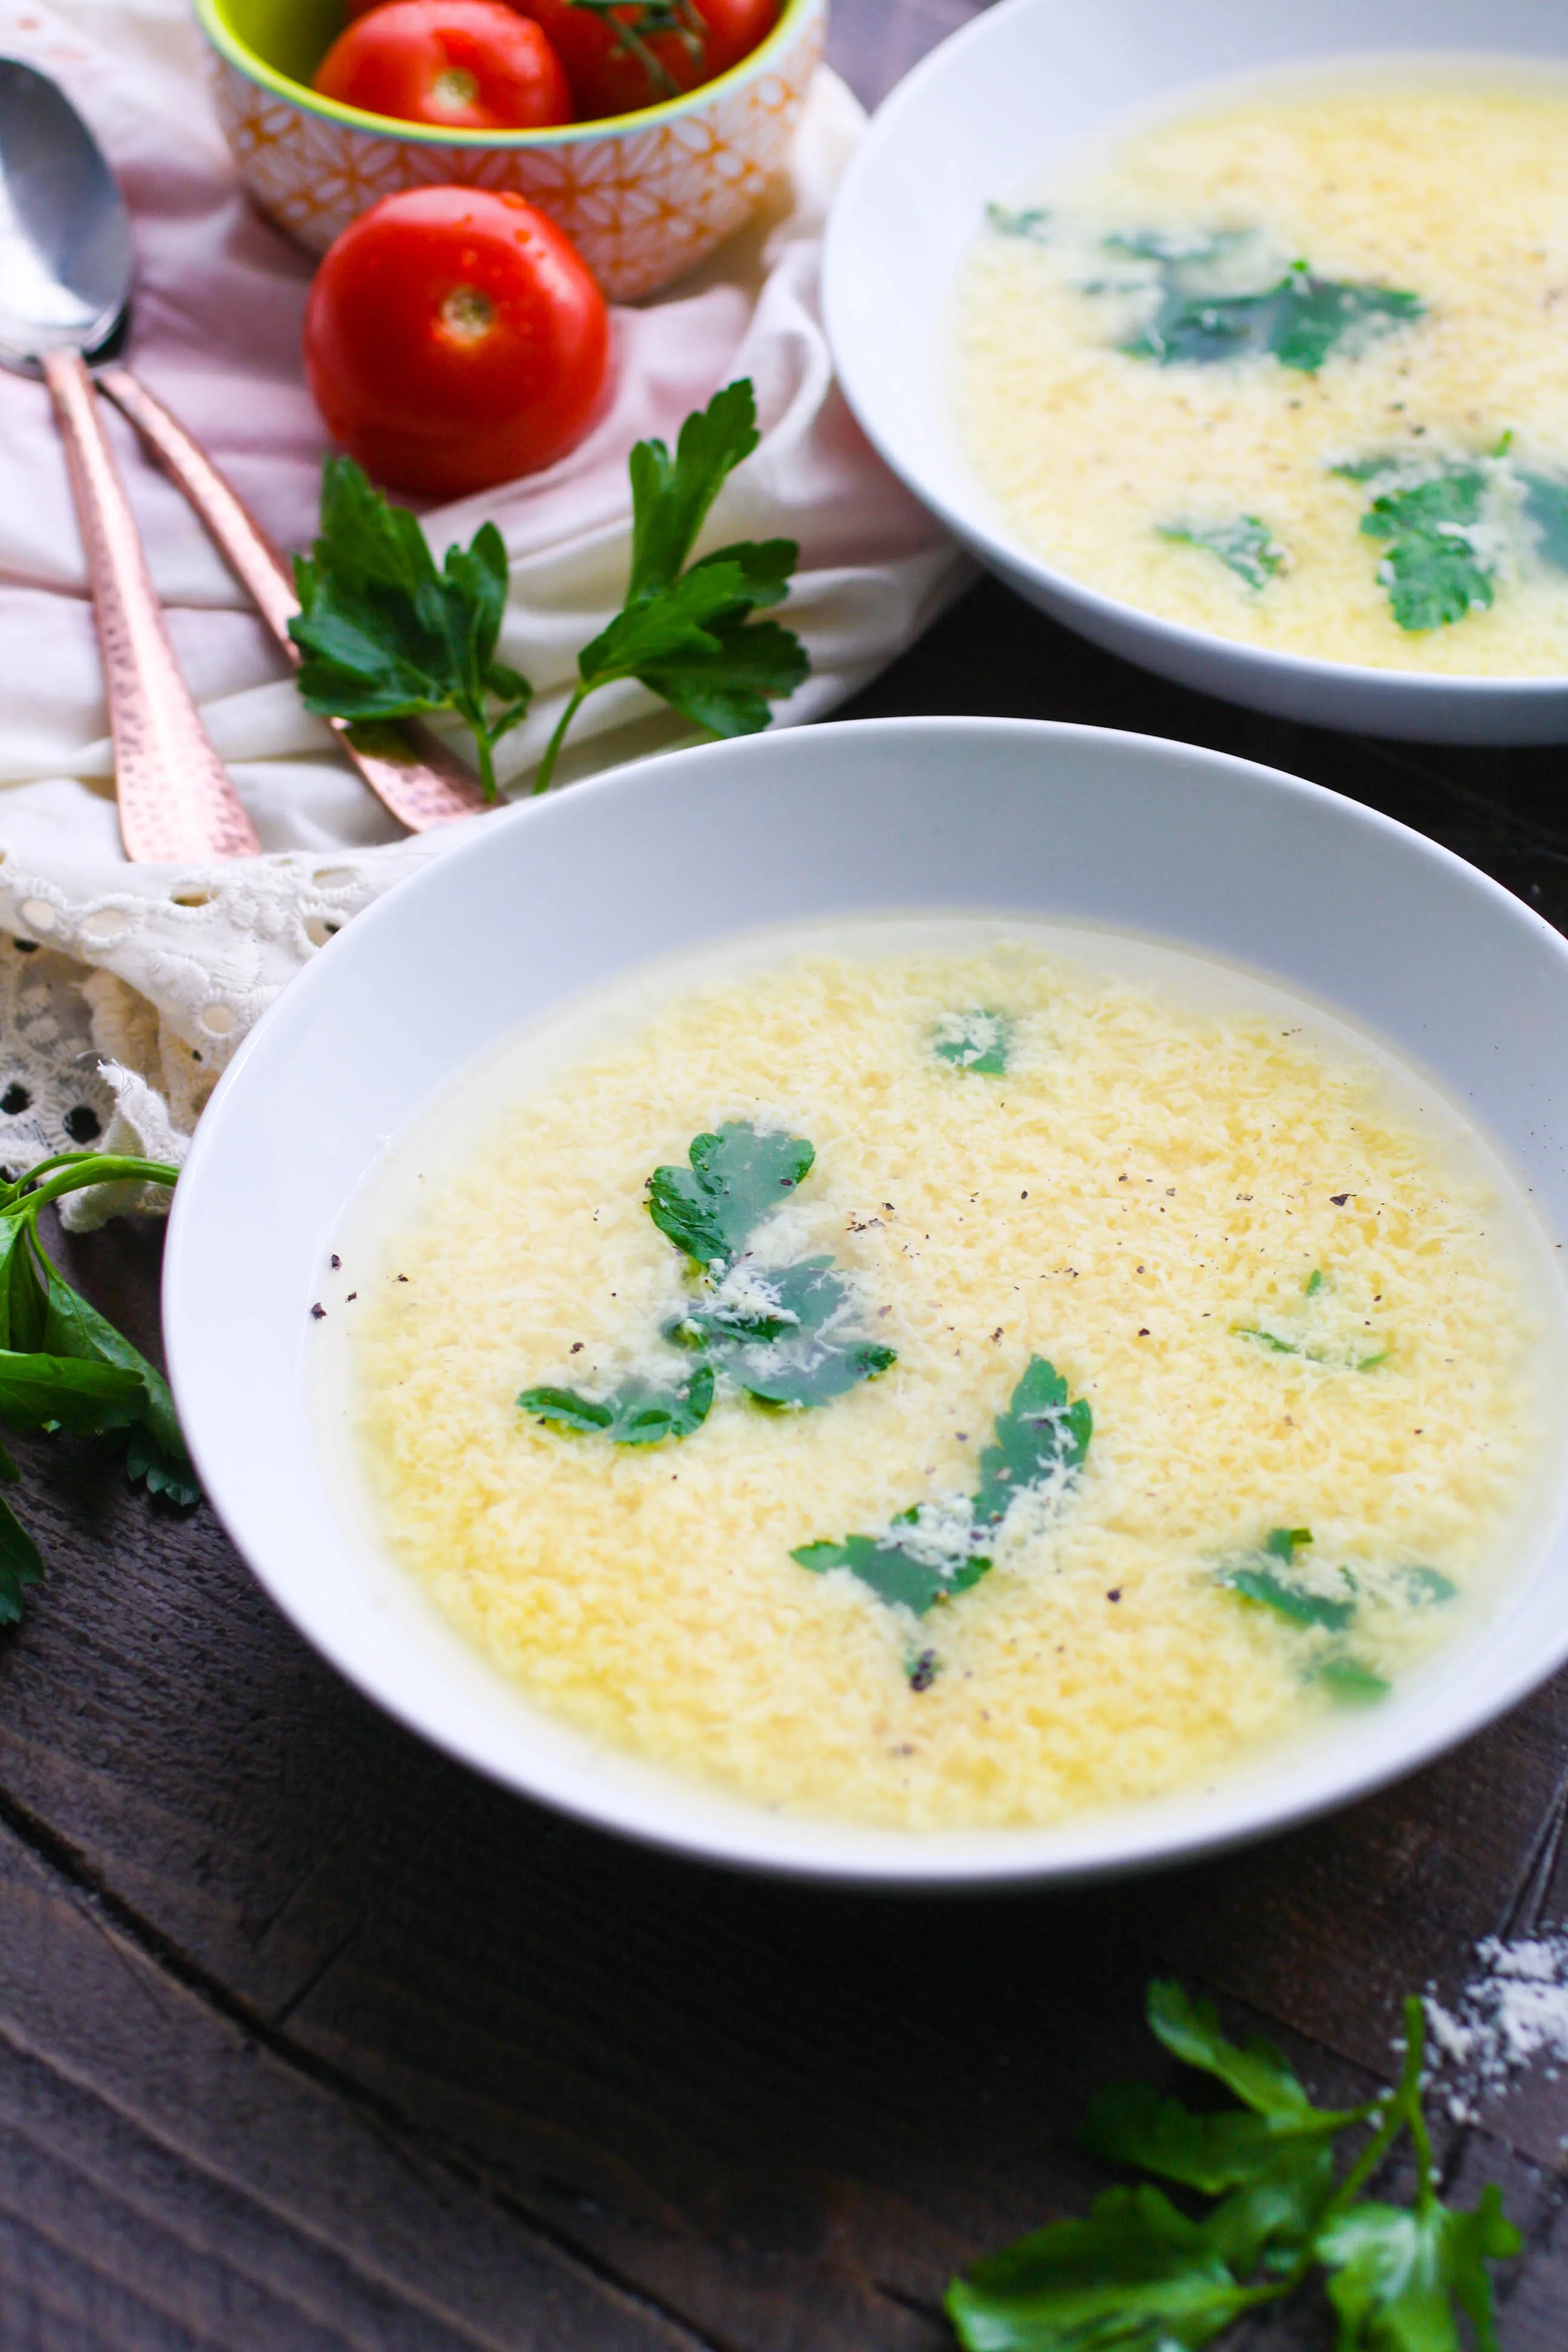 Stracchiatella soup (Italian egg drop soup) is a wonderfully simple soup. You'll love this simple stracchiatella soup on a cold winter day!